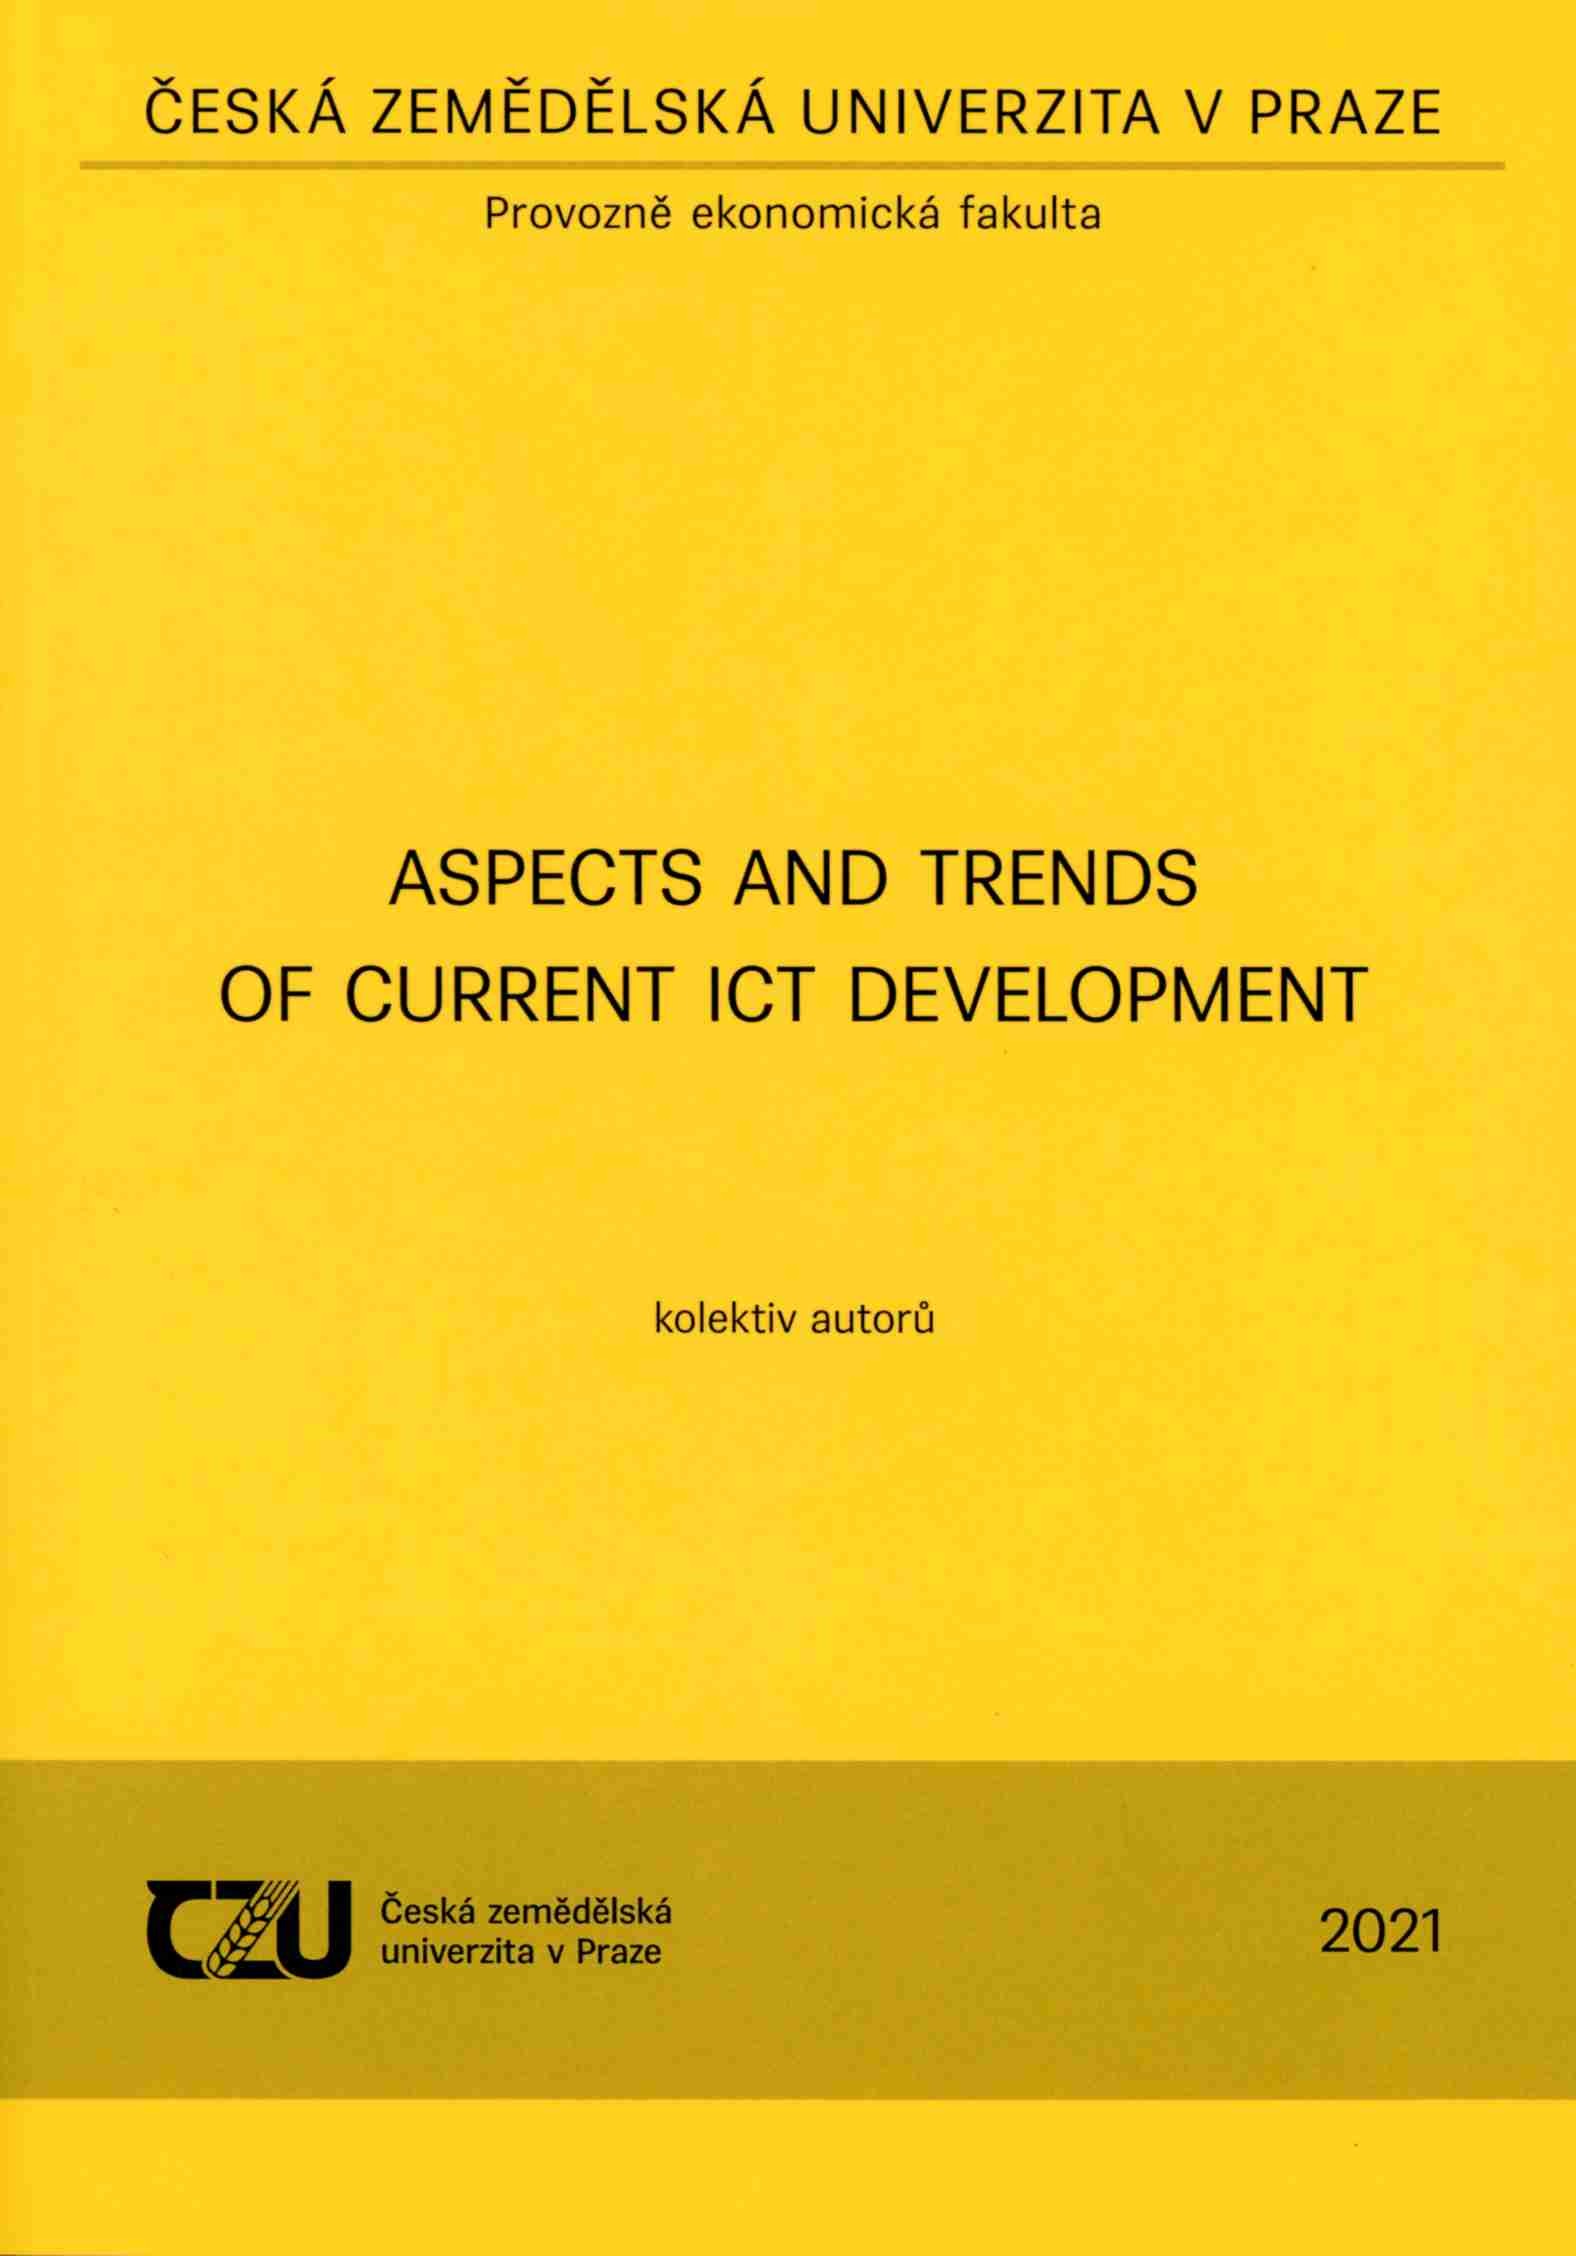 Aspects and trends of current ICT development